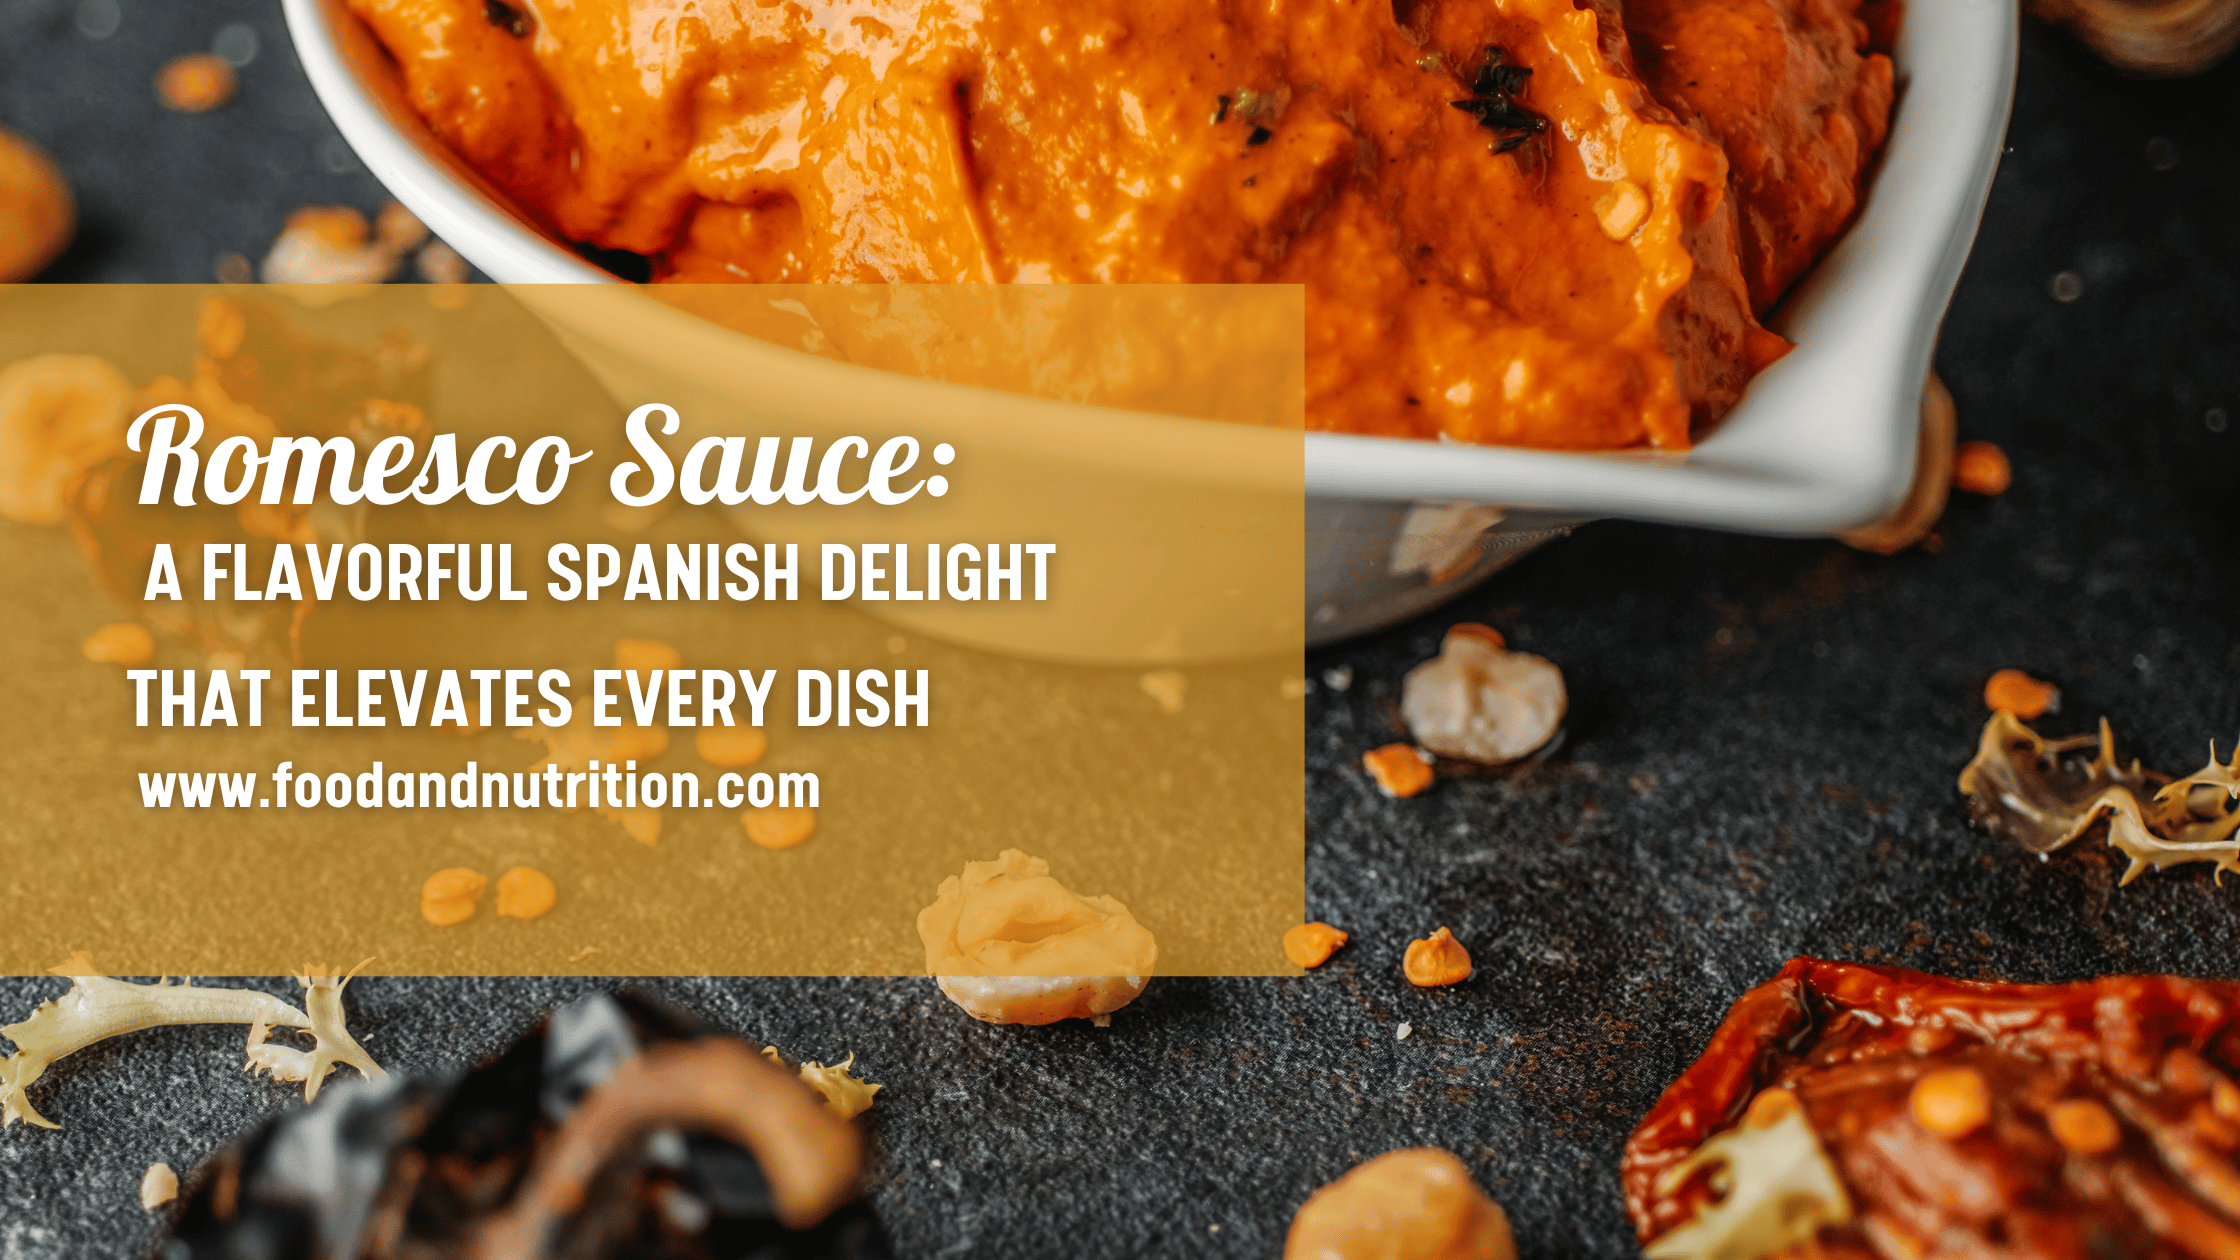 Romesco Sauce: A Flavorful Spanish Delight That Elevates Every Dish